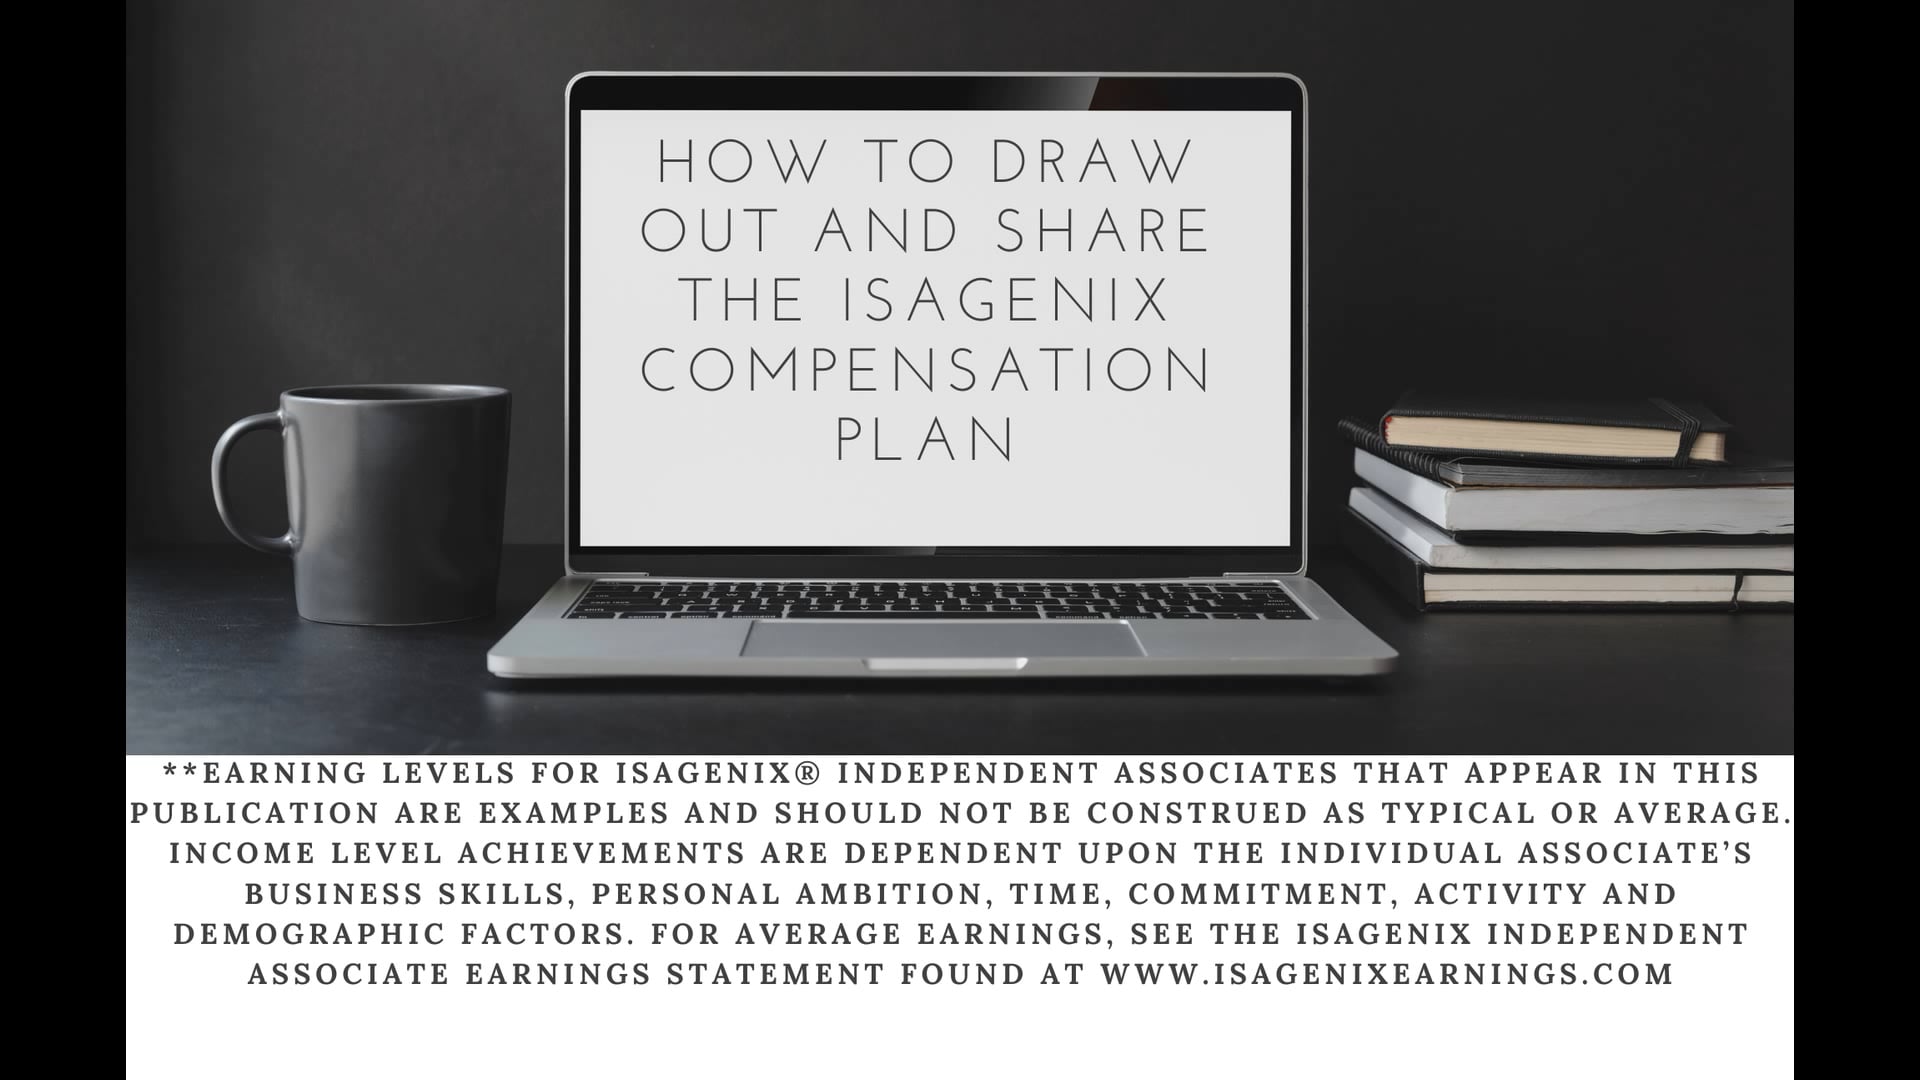 How to Draw Out and Share the Isagenix Compensation Plan